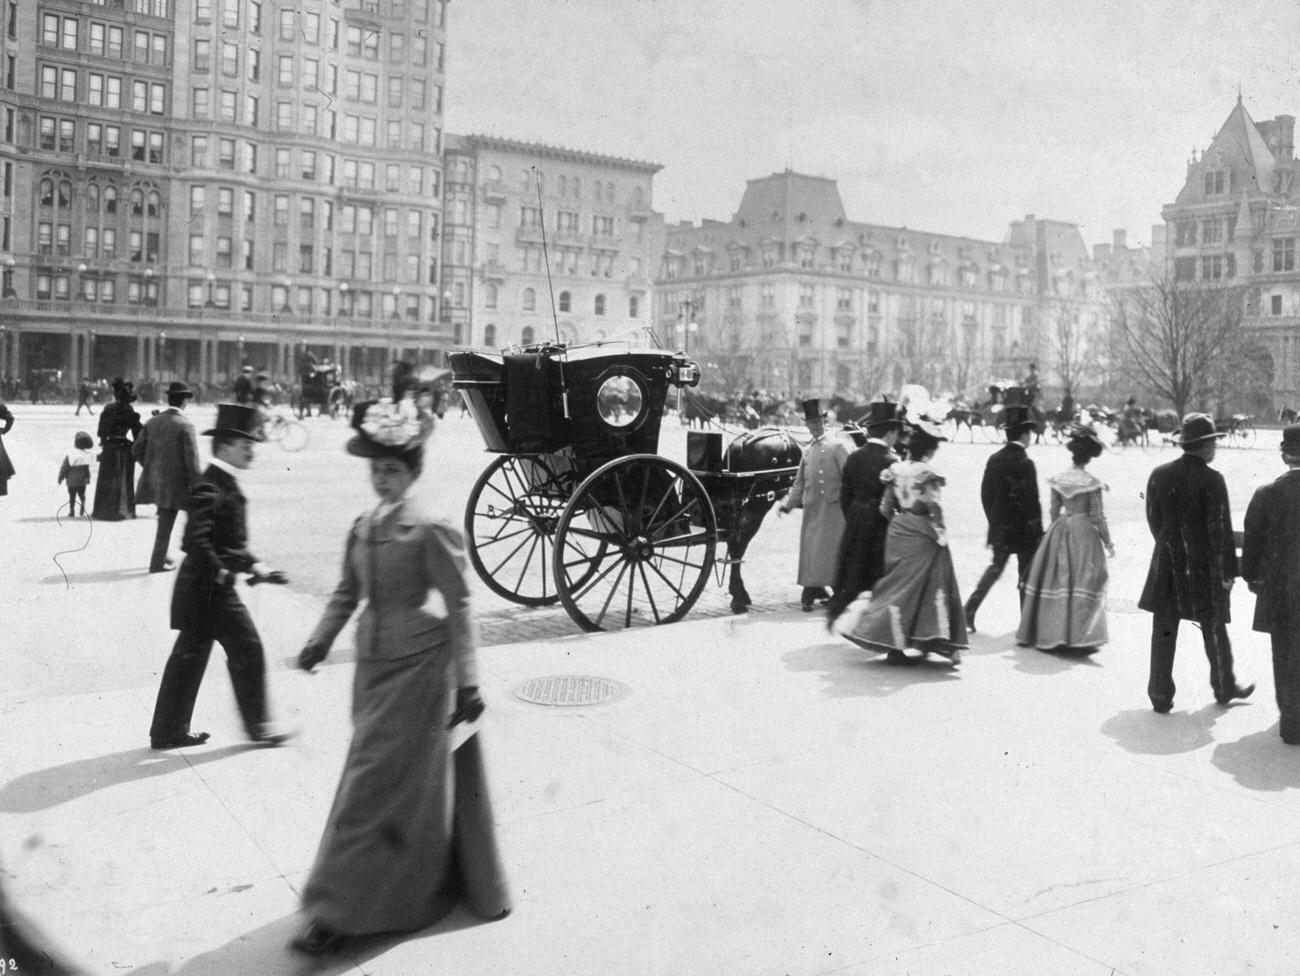 Men And Women Walk On Fifth Avenue In Front Of The Plaza Hotel Between 57Th And 59Th Streets, As A Horsedrawn Carriage Sits By The Curb, 1898